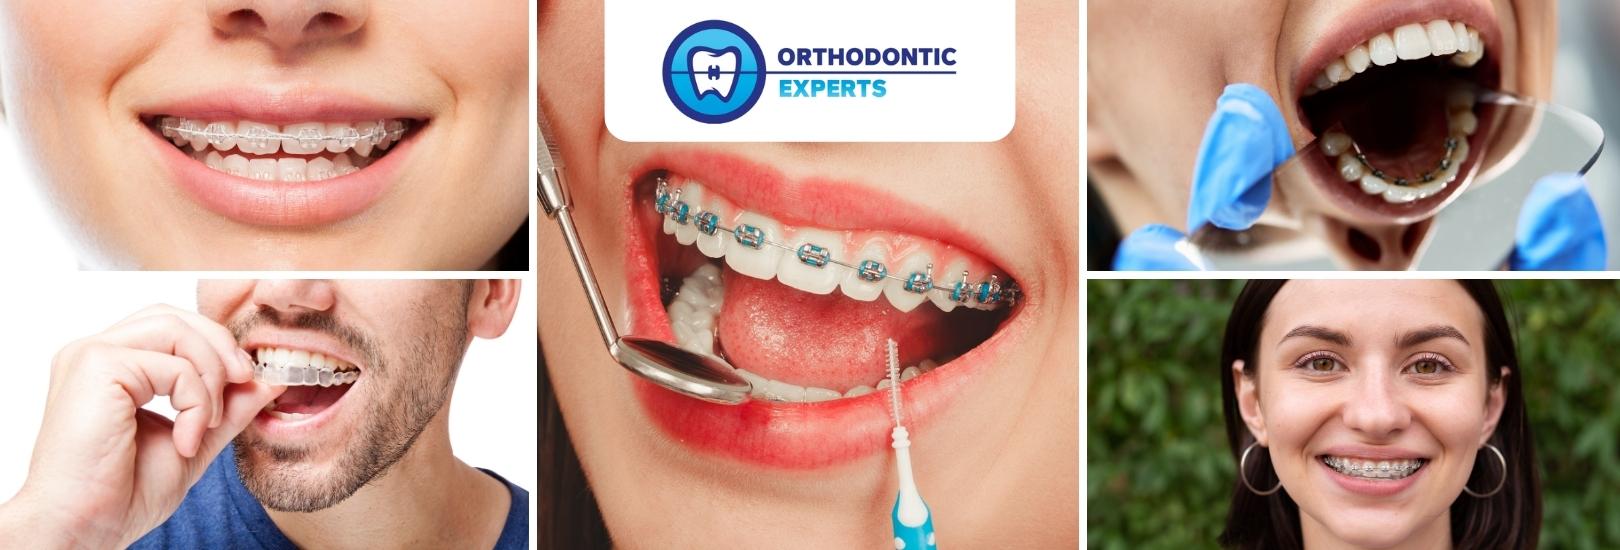 10 FREQUENTLY ASKED QUESTIONS ON INVISIBLE ORTHODONTICS